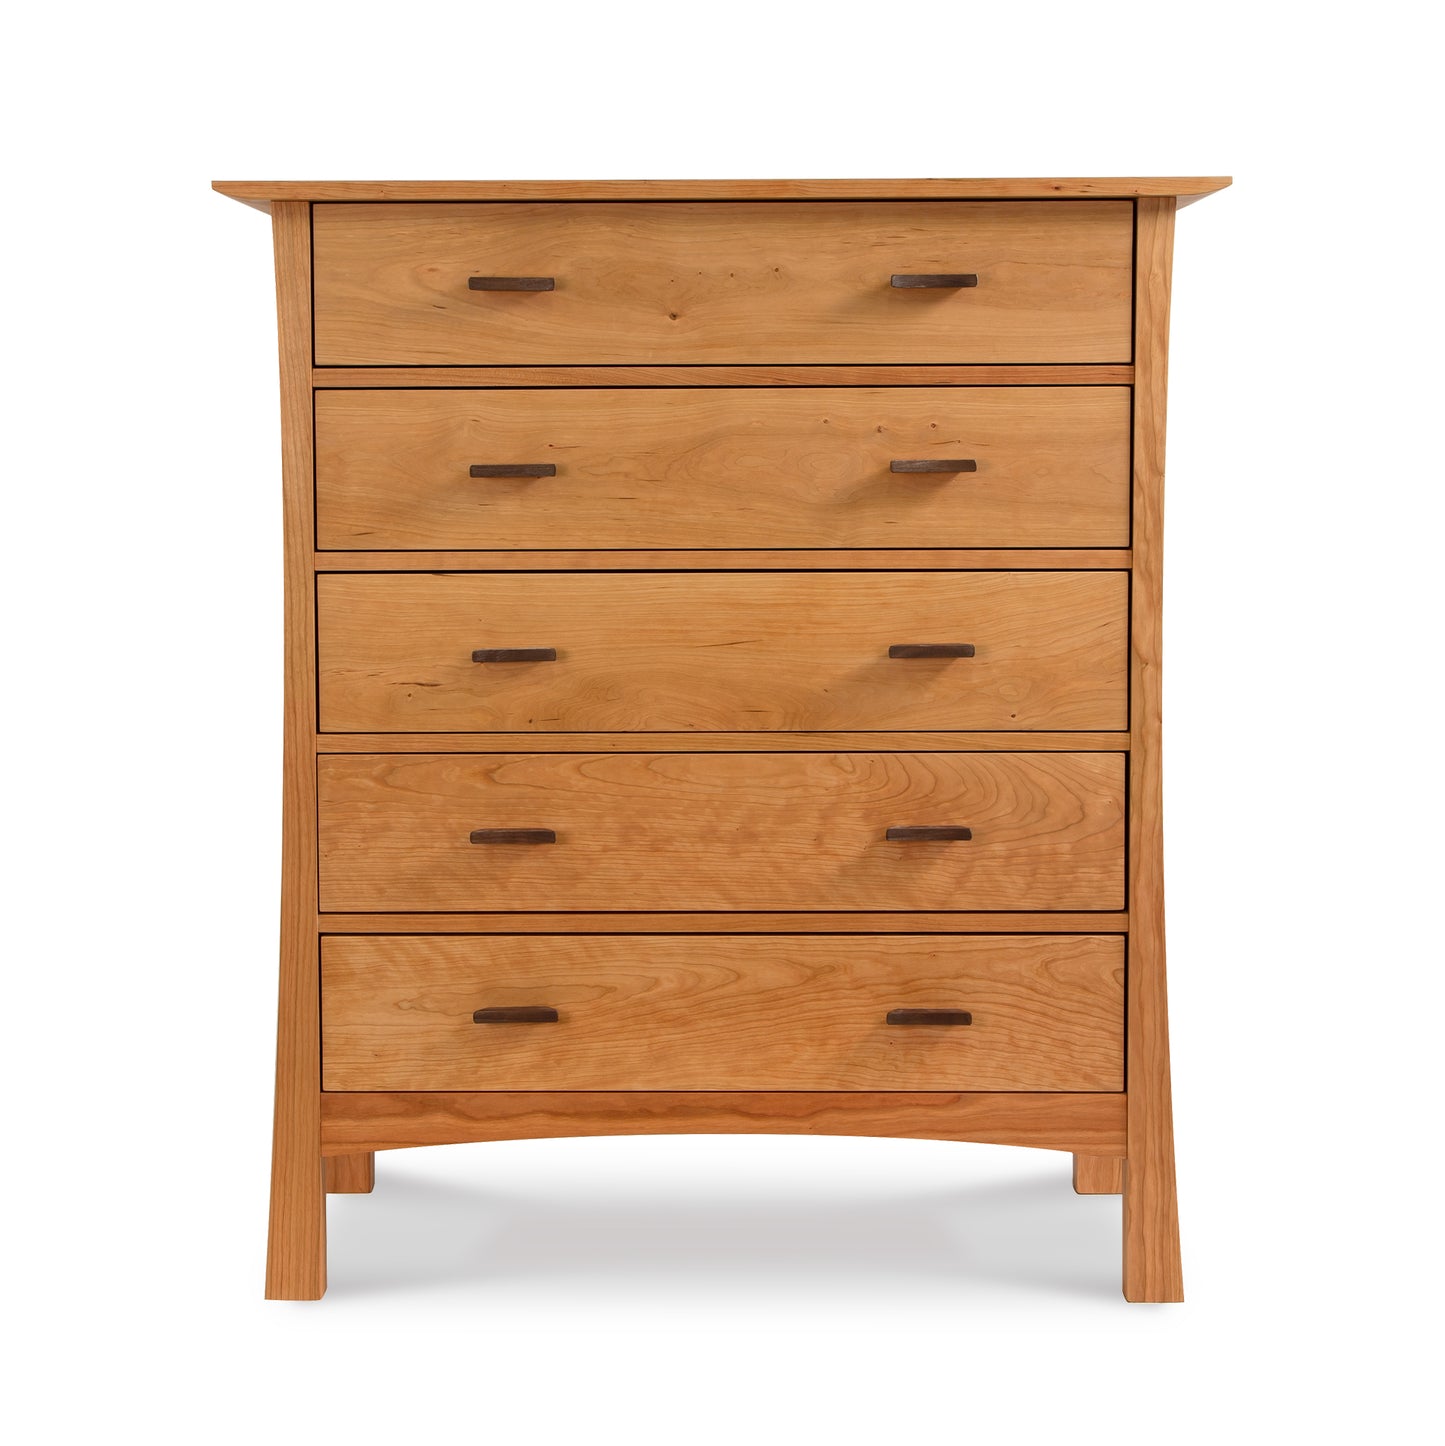 A Contemporary Craftsman 5-Drawer Chest from Vermont Furniture Designs with metal handles on a white background.